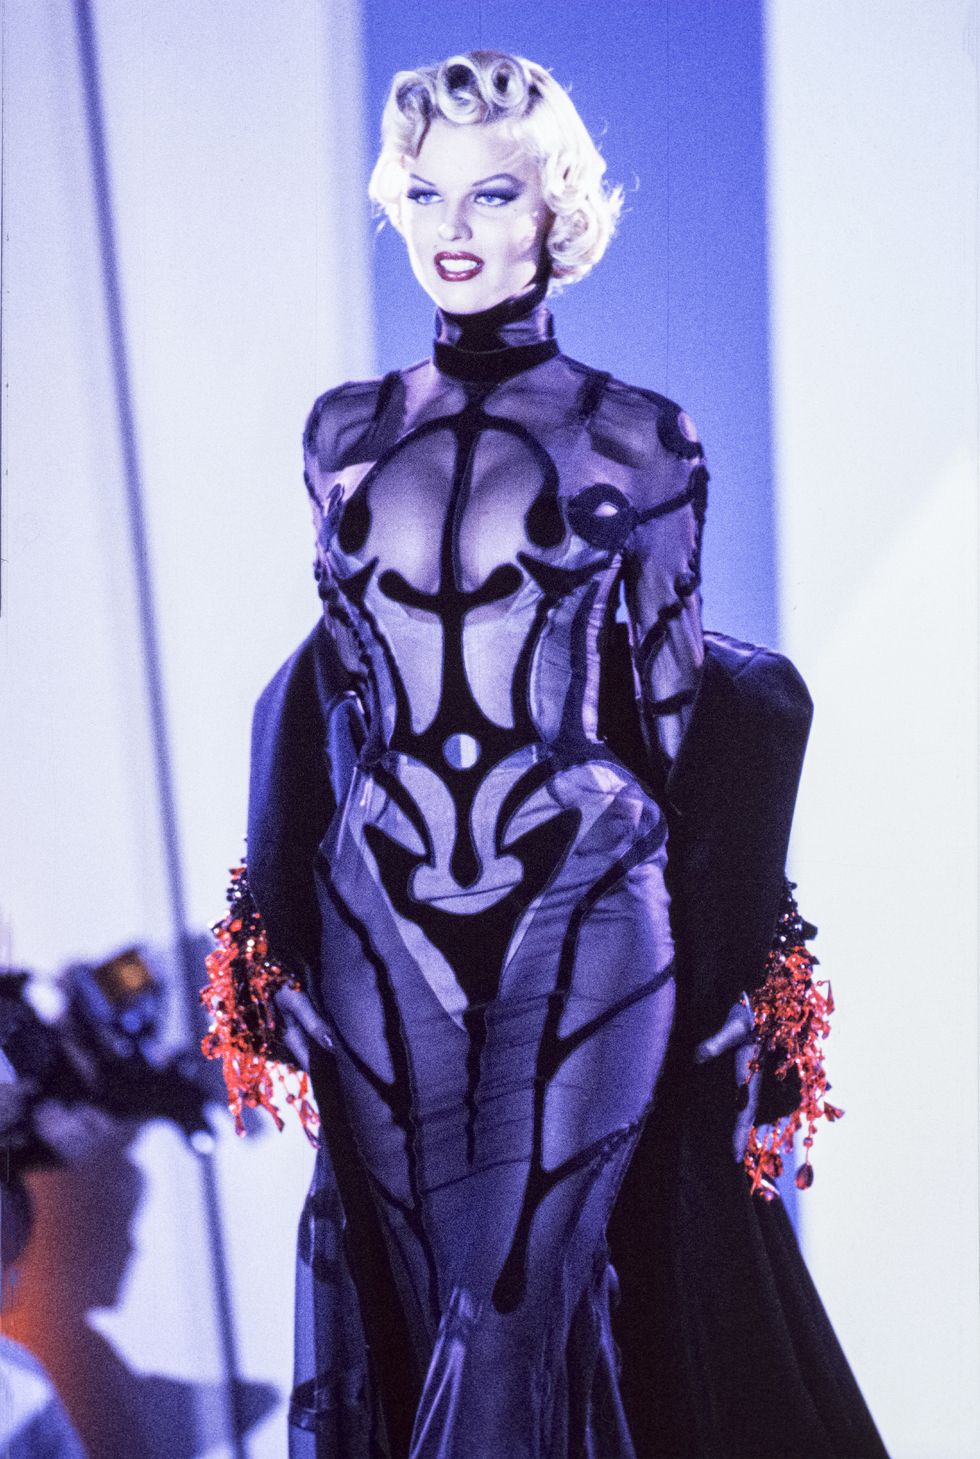 paris, france   october eva herzigova walks the runway at the thierry mugler ready to wear springsummer 1992 1993 fashion show during the paris fashion week in october, 1992 in paris, france photo by victor virgilegamma rapho via getty images